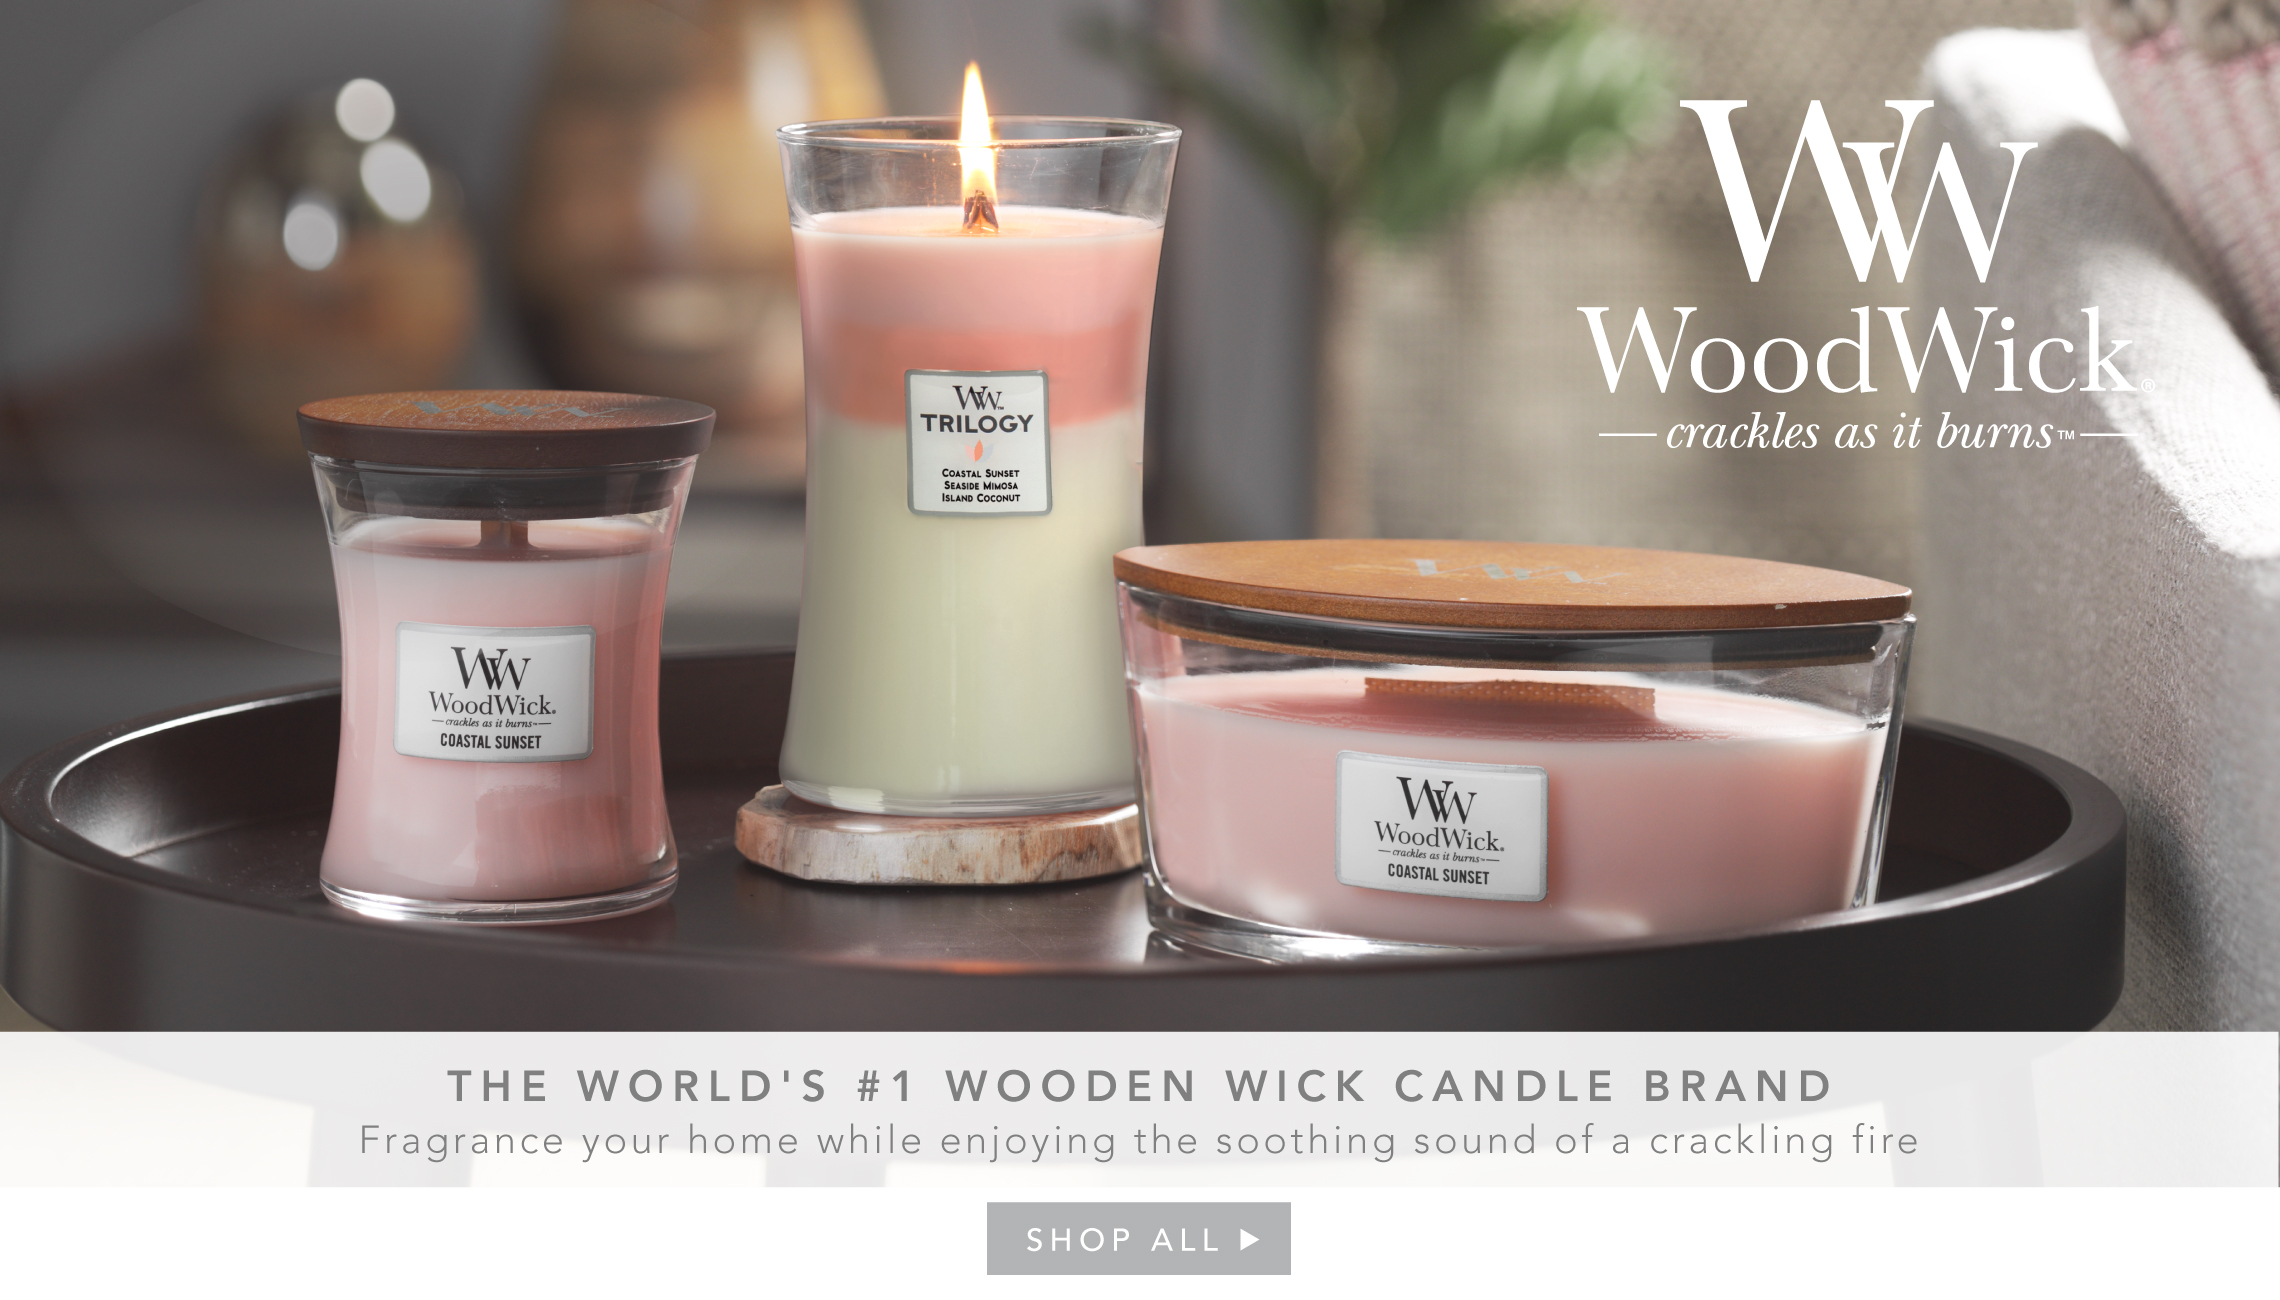 The world's #1 wooden wick candle brand